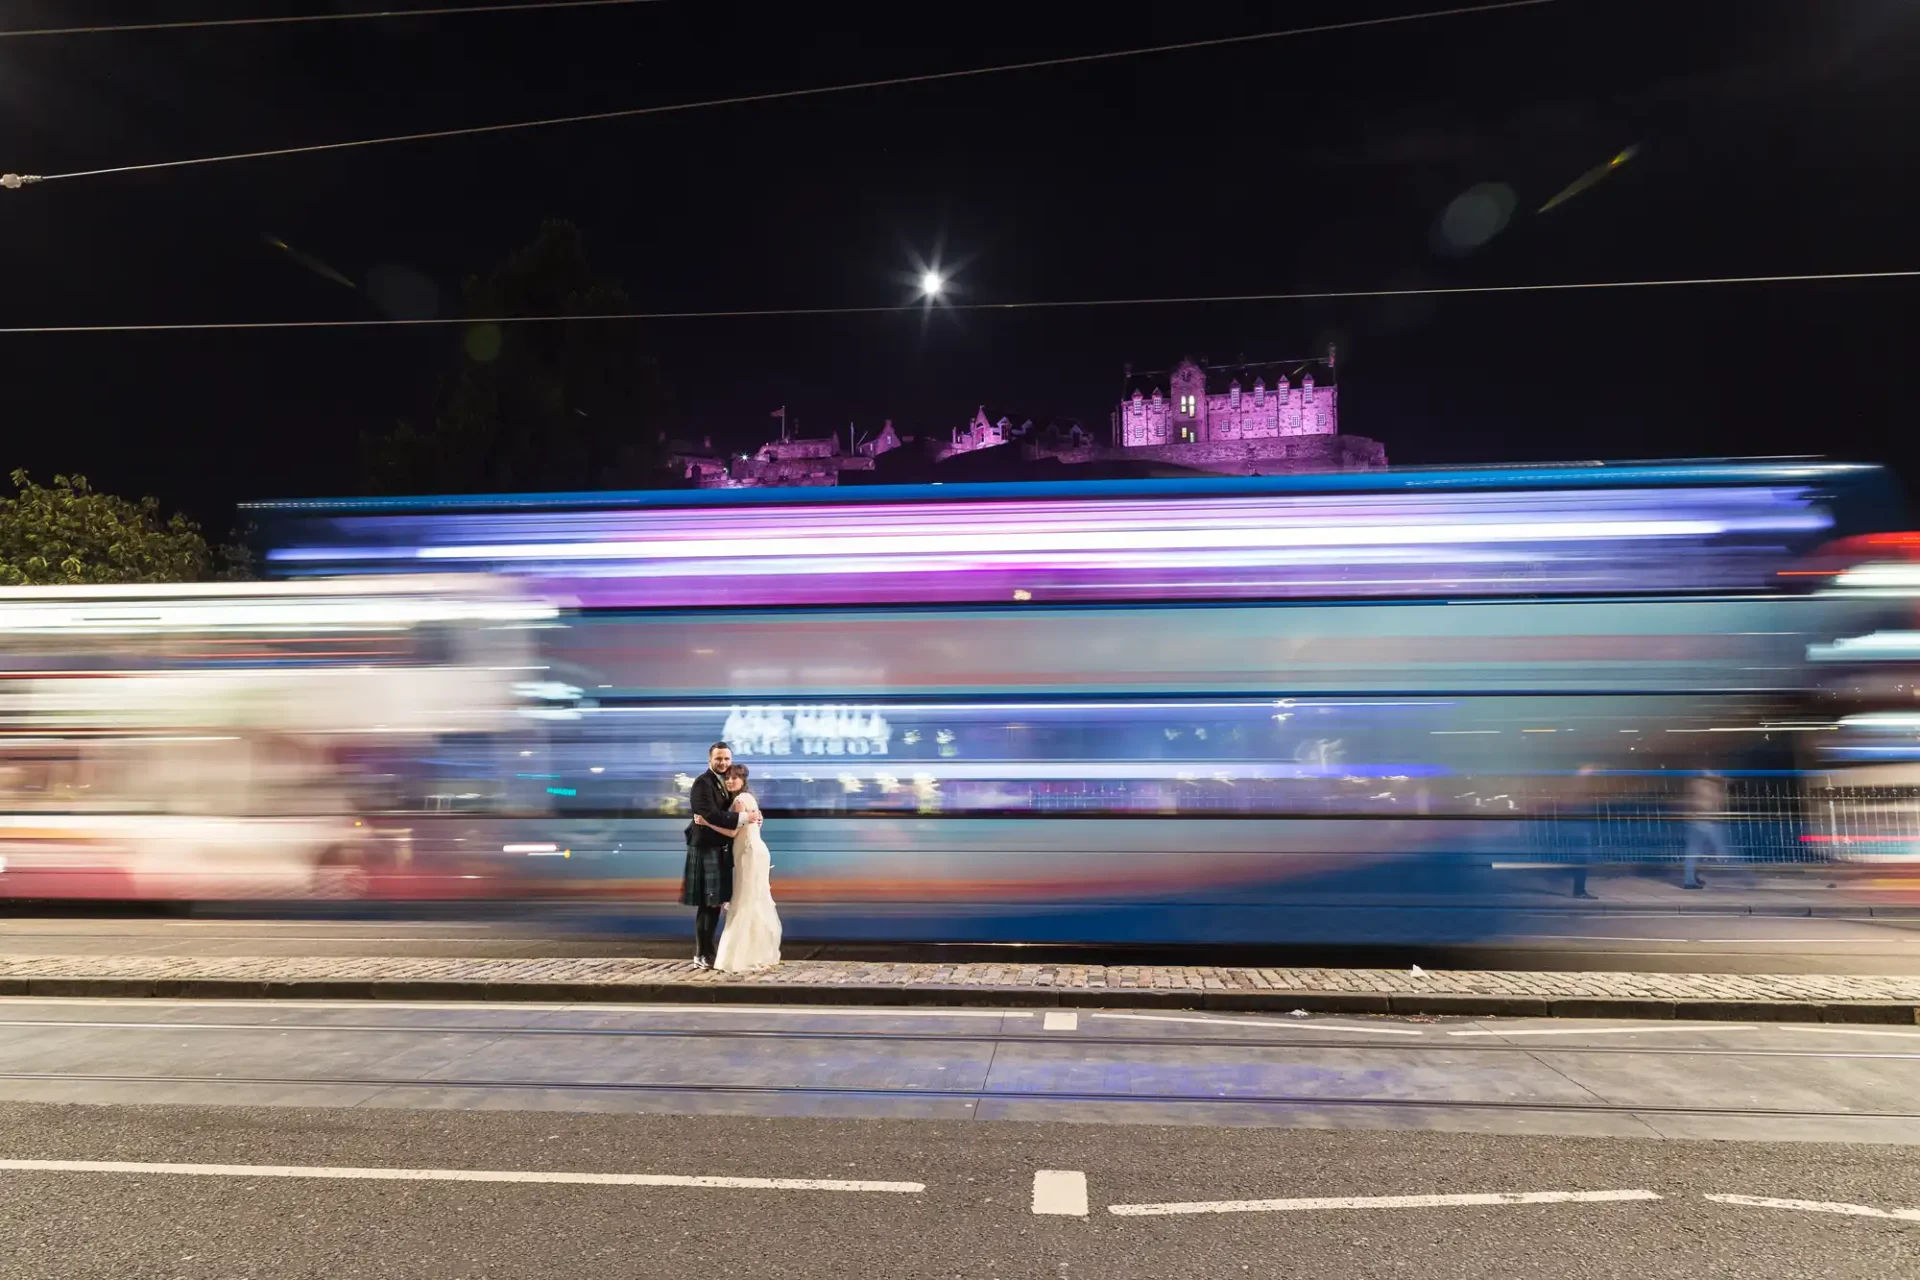 A couple embraces on a city street at night with a motion-blurred bus passing by and a lit castle in the background.